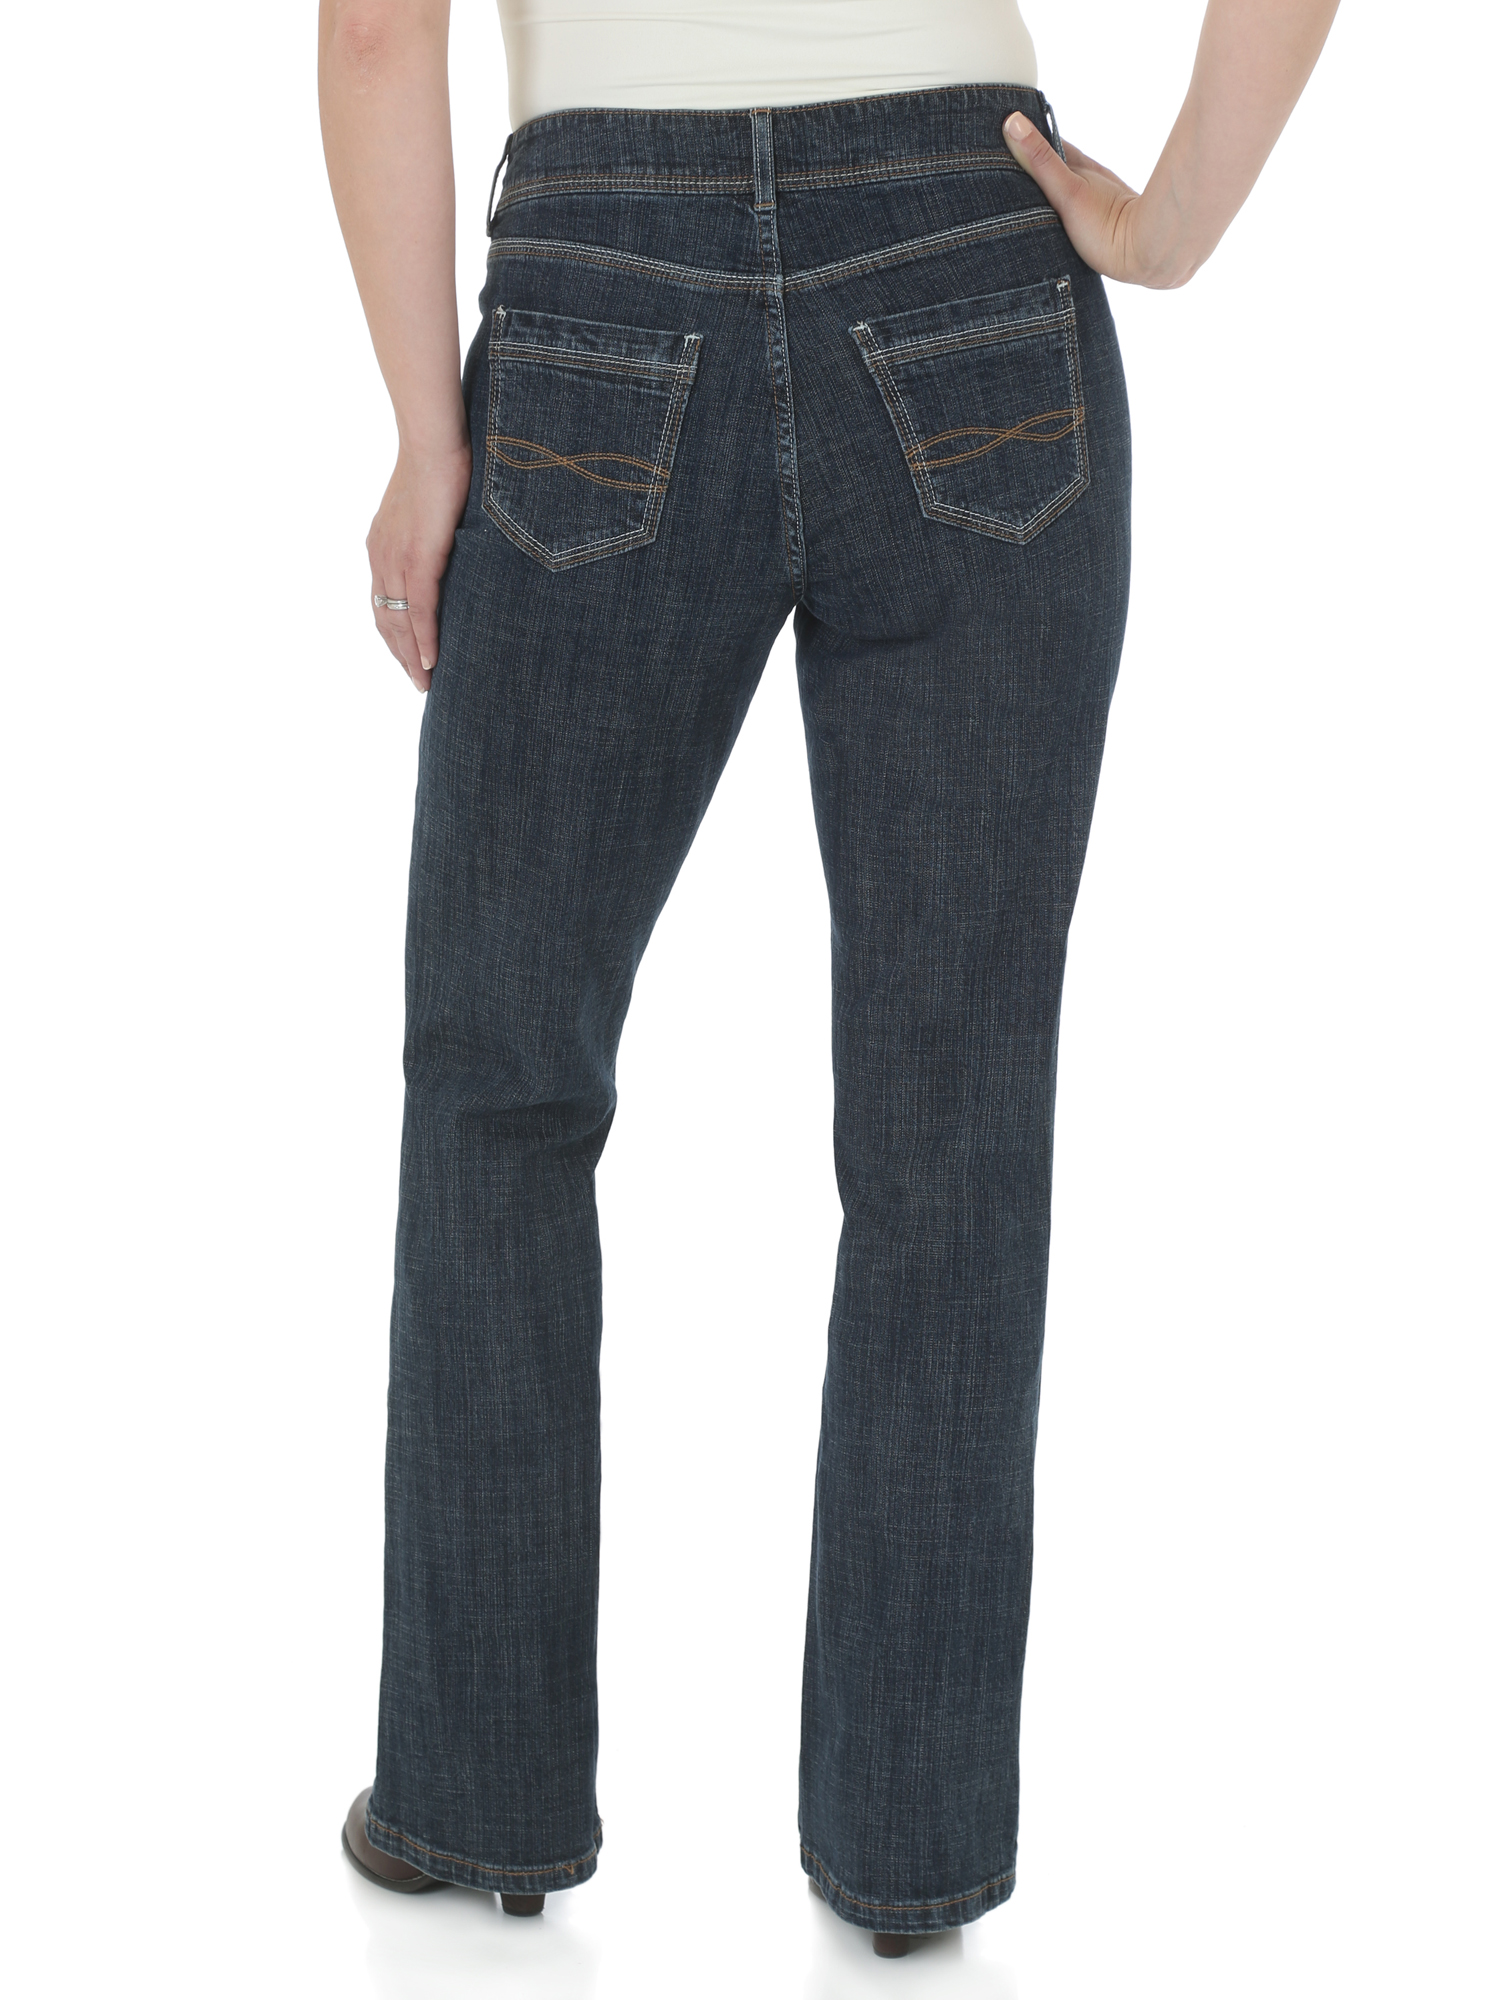 Women's Slender Stretch Bootcut Jean - image 3 of 3